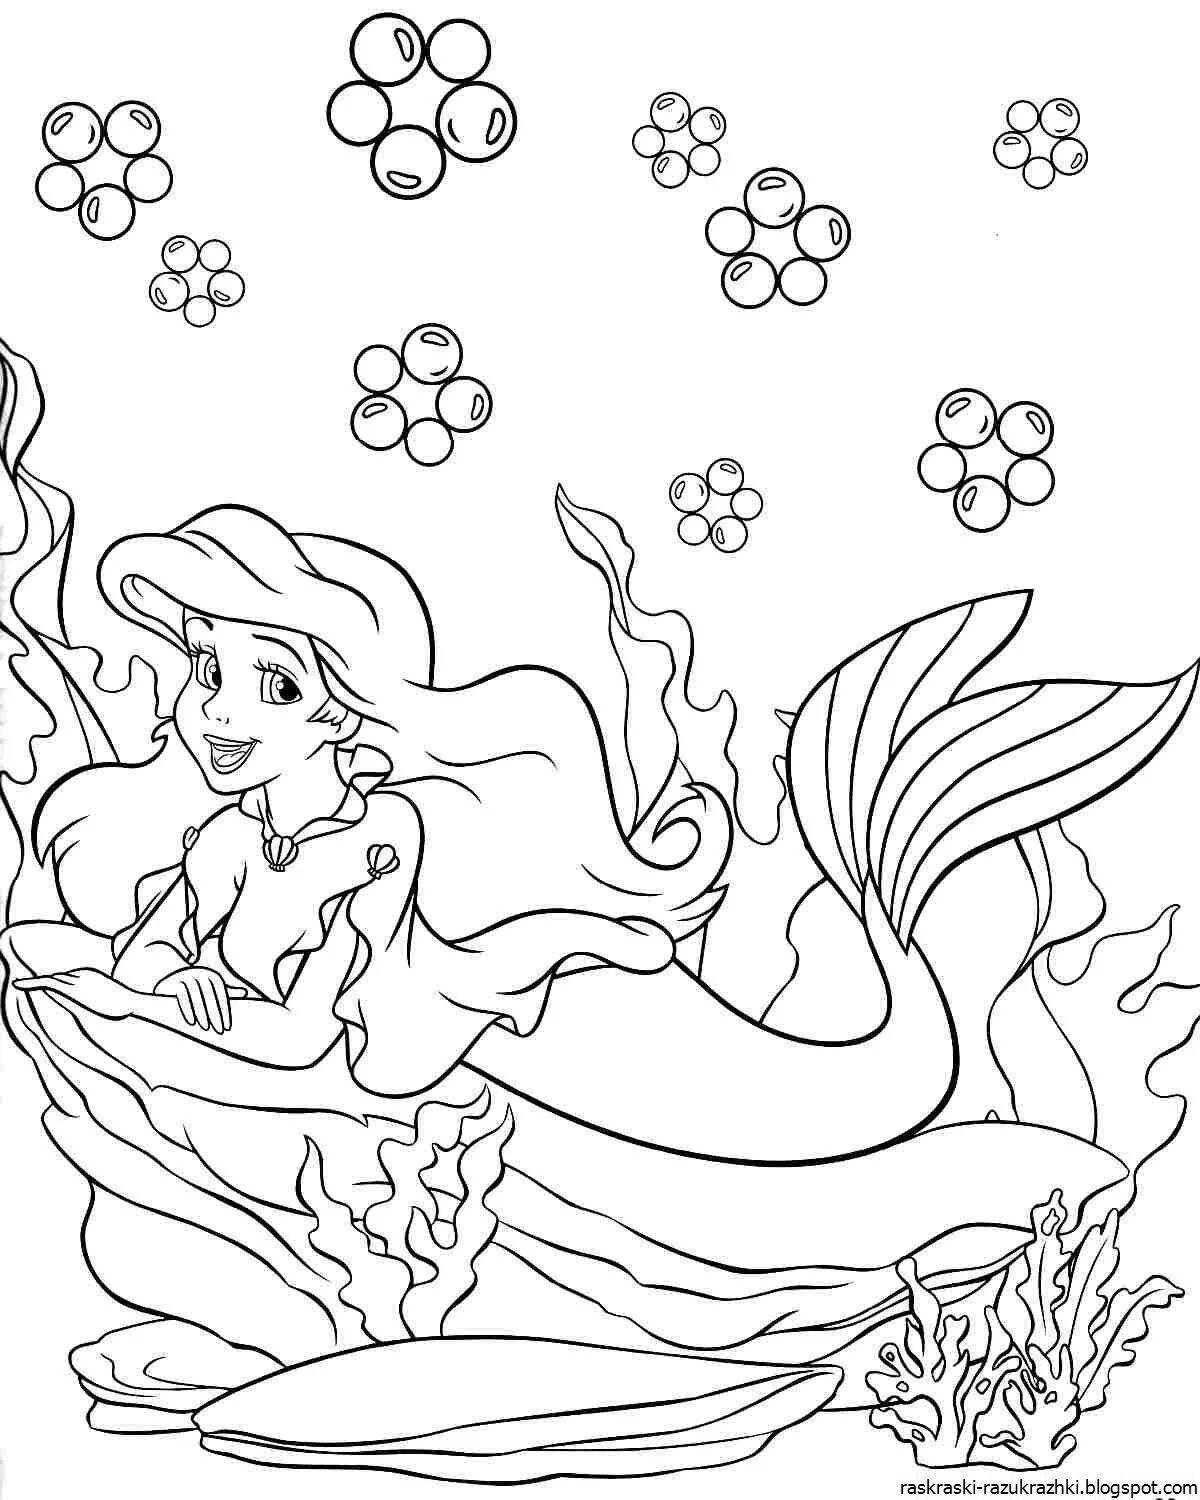 Colorful ariel coloring book for kids